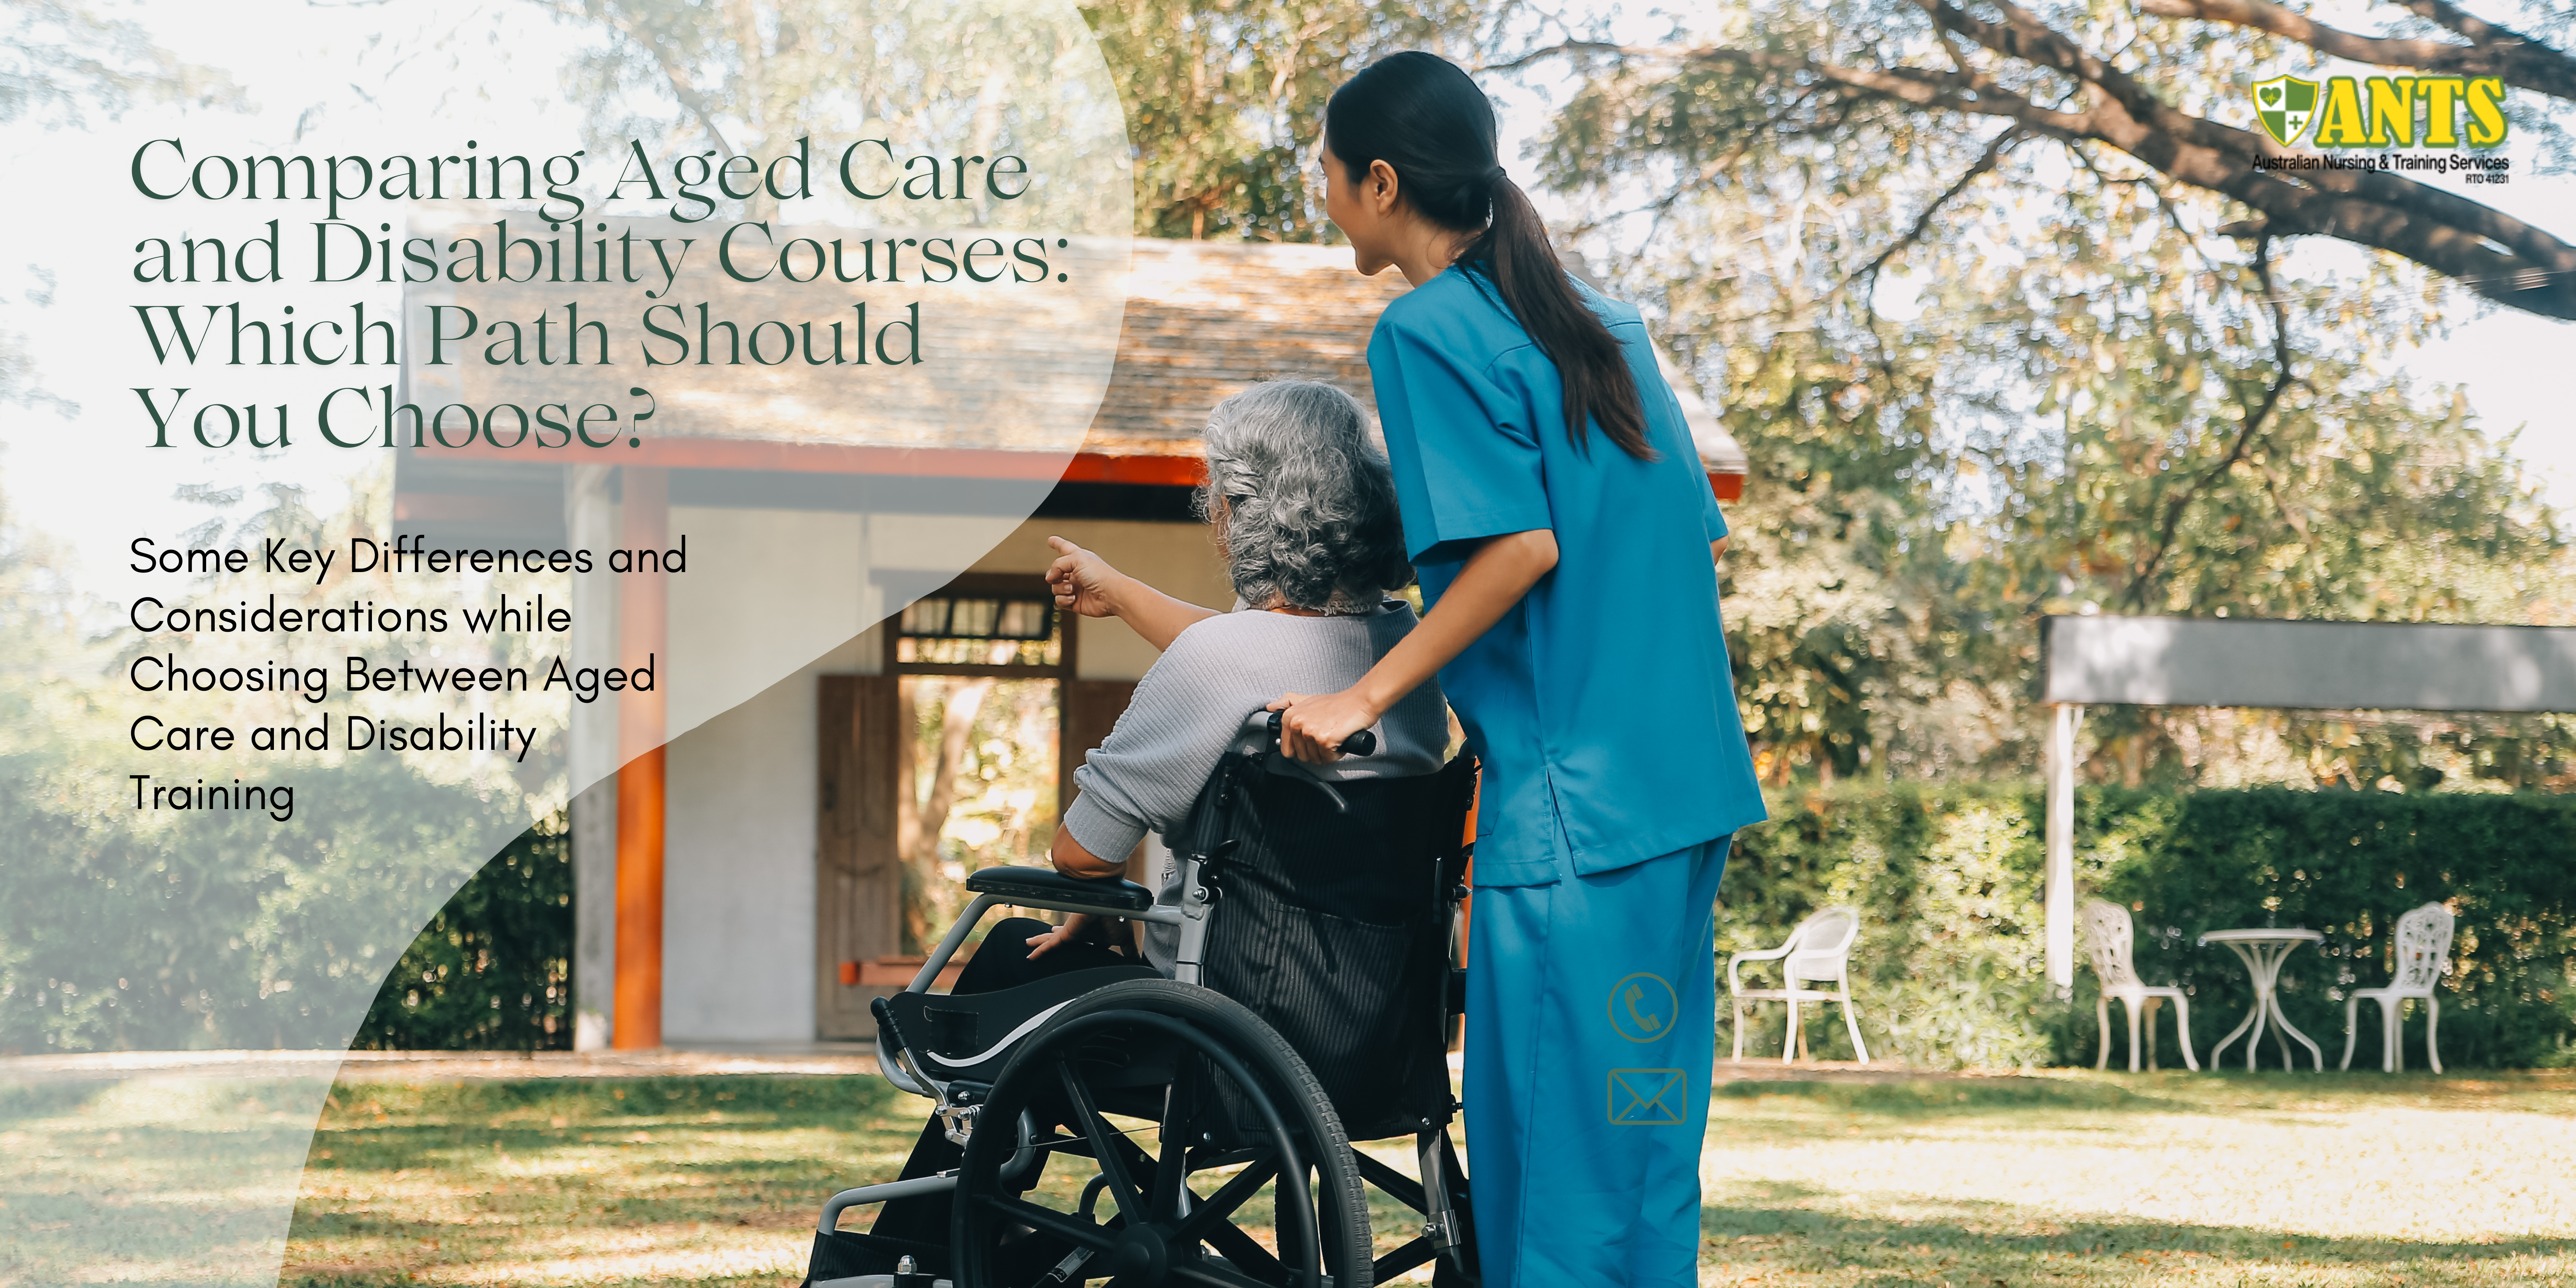 Comparing Aged Care and Disability Courses: Which Path Should You Choose?